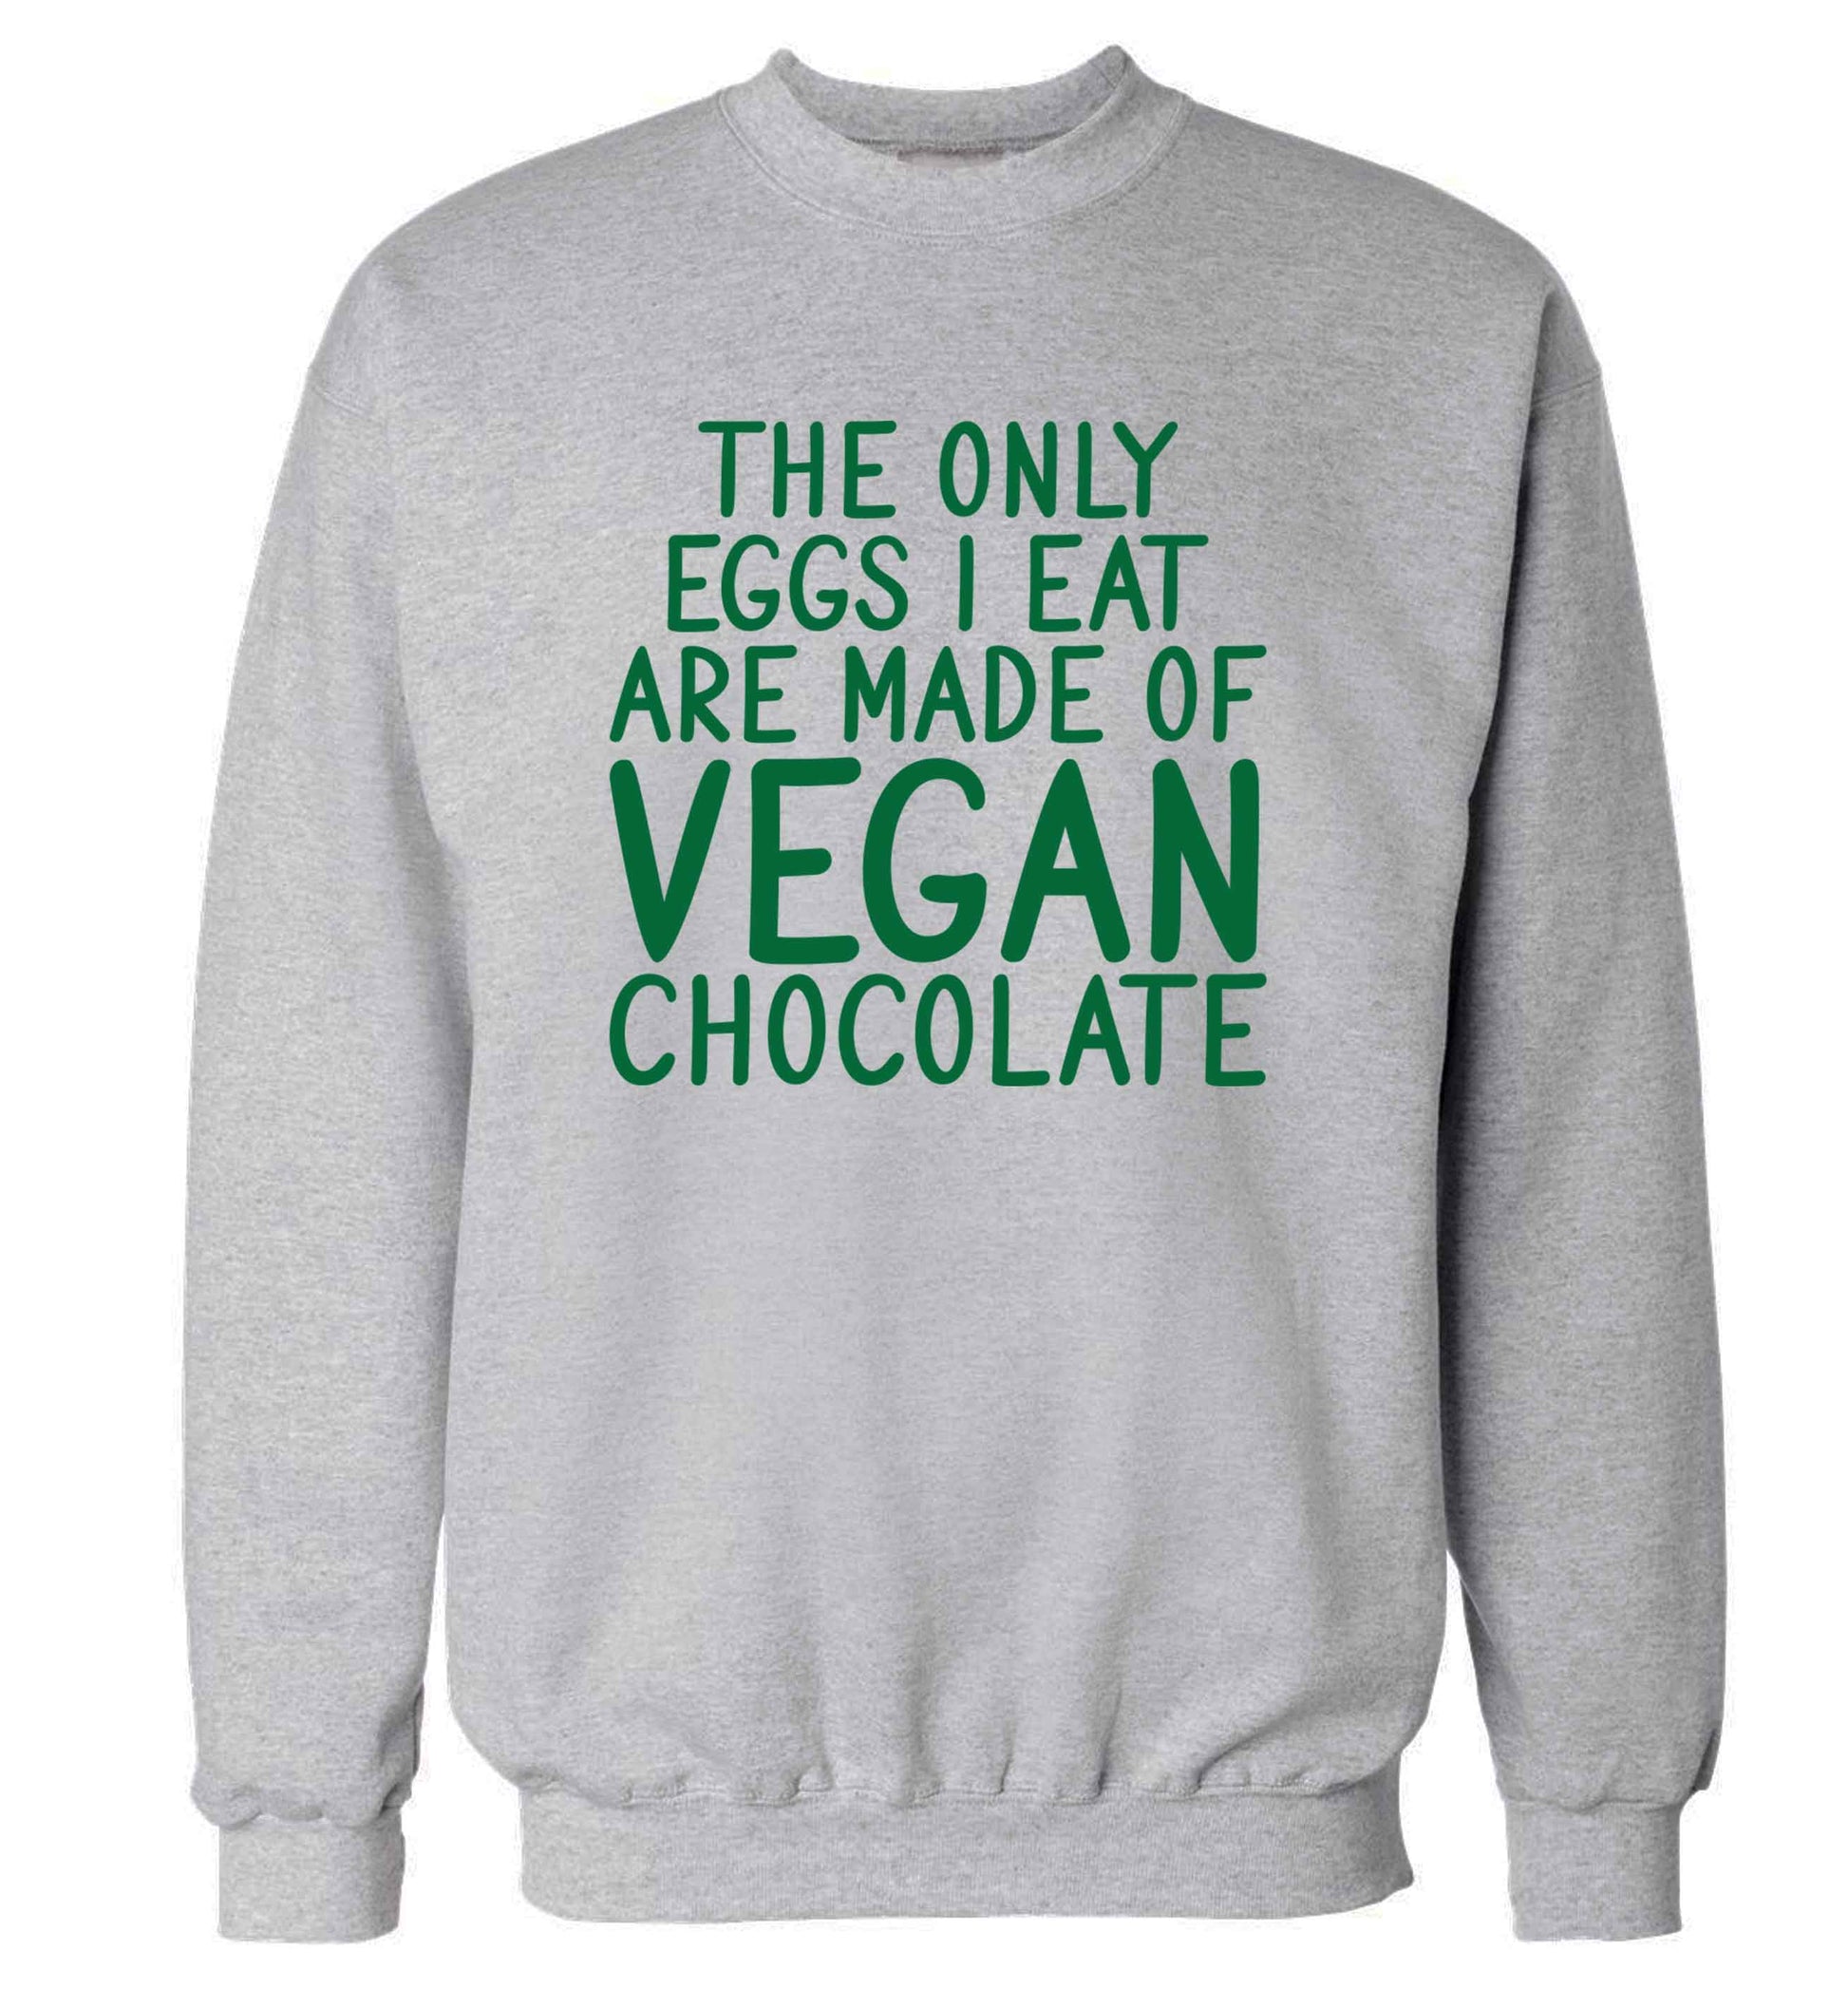 The only eggs I eat are made of vegan chocolate adult's unisex grey sweater 2XL